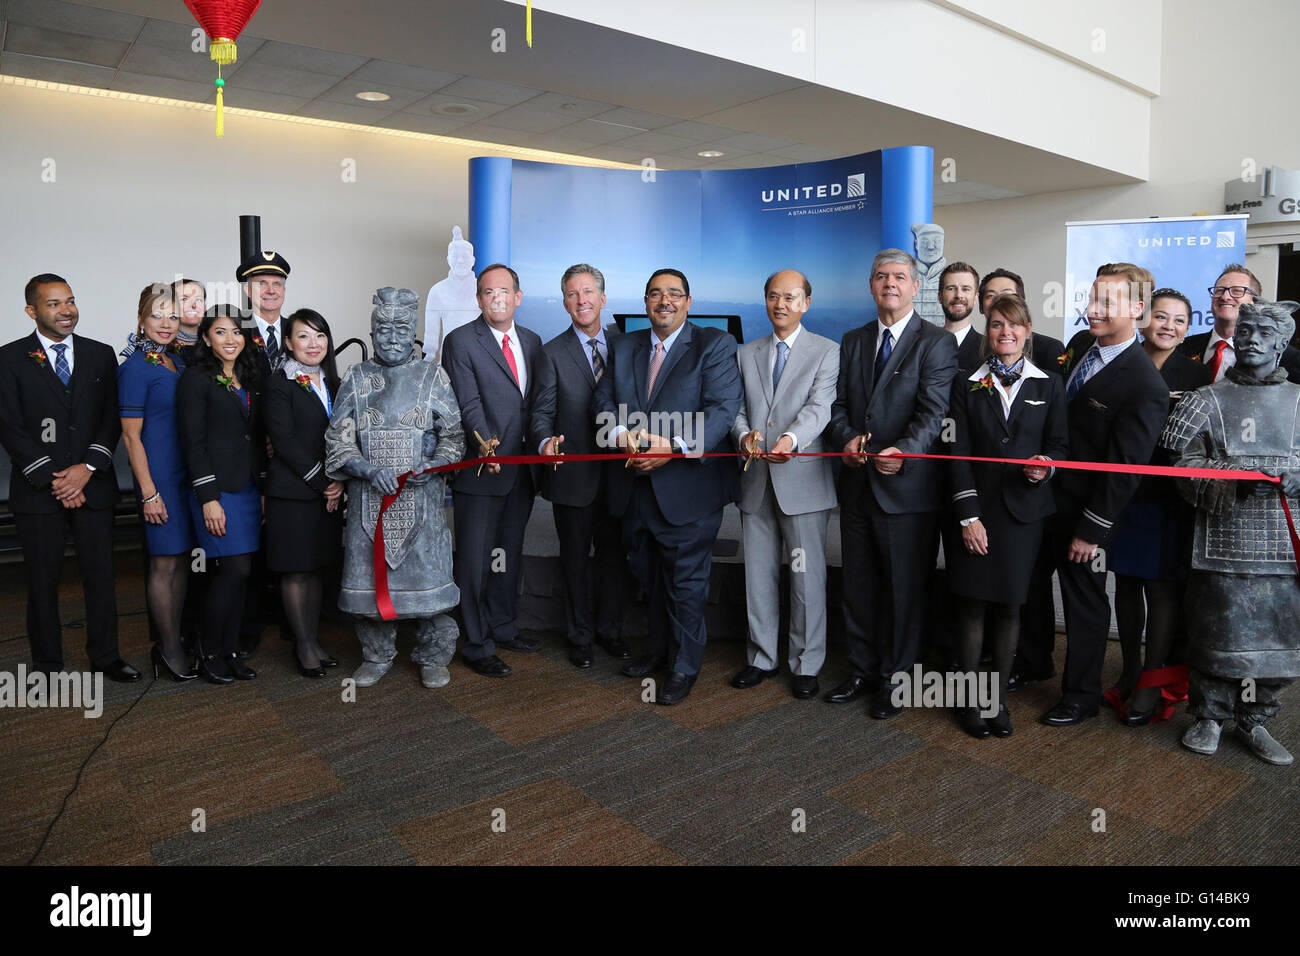 (160509) -- SAN FRANCISCO, May 9, 2016 (Xinhua) -- Chinese Consul General in San Francisco Luo Linquan (5th R), United Airlines' vice president of Atlantic and Pacific sales Marcel Fuchs (4th R) and other guests cut the ribbon for the United's inaugural nonstop flight from San Francisco to China's Xi'an at the San Francisco International Airport, United States, on May 8, 2016. United Airlines celebrated the launch of new nonstop flights from U.S. west coast city San Francisco to Chinese western city Xi'an at the San Francisco International Airport on Sunday. The three-times-weekly seasonal ser Stock Photo